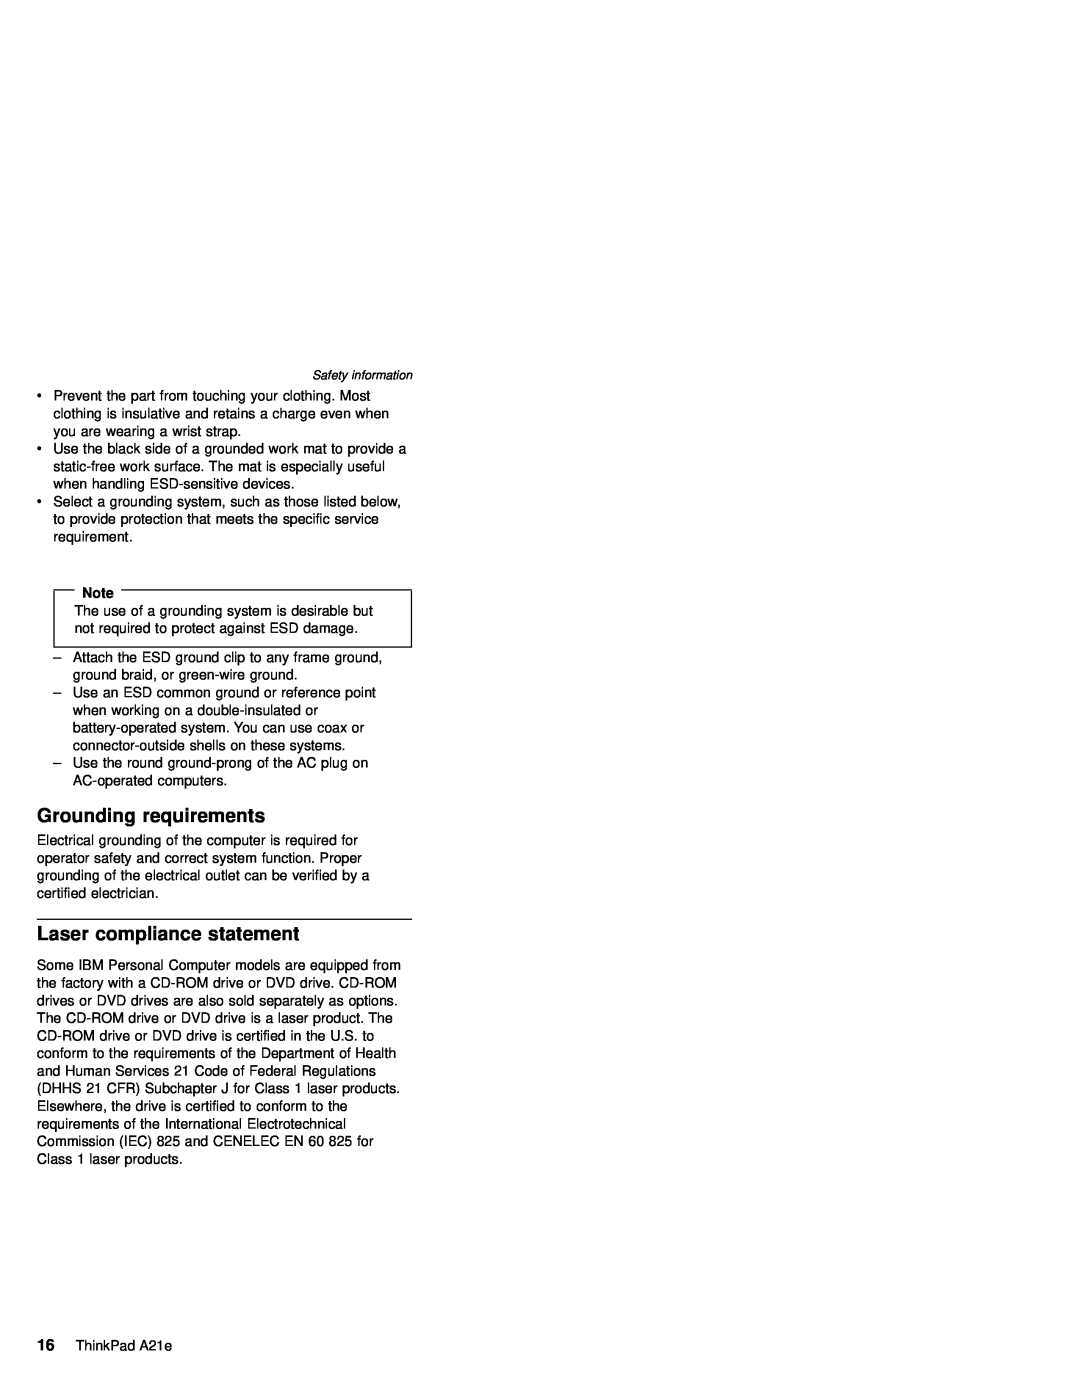 IBM MT 2632 manual Grounding requirements, Laser compliance statement 